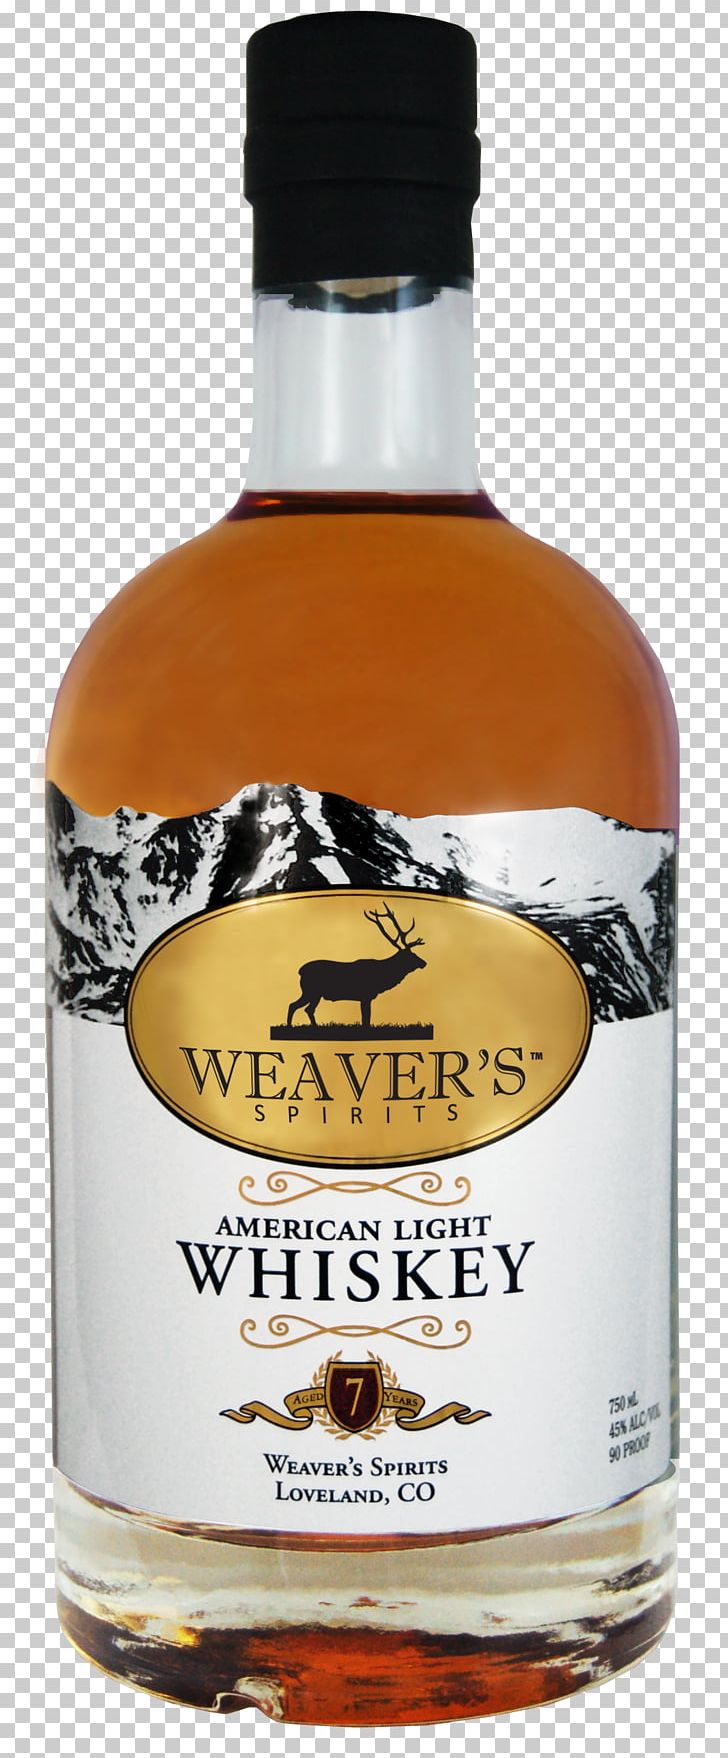 American Whiskey Distilled Beverage Irish Whiskey Rye Whiskey PNG, Clipart, 7 Years, Alcoholic Beverage, Alcoholic Drink, American Whiskey, Barrel Free PNG Download